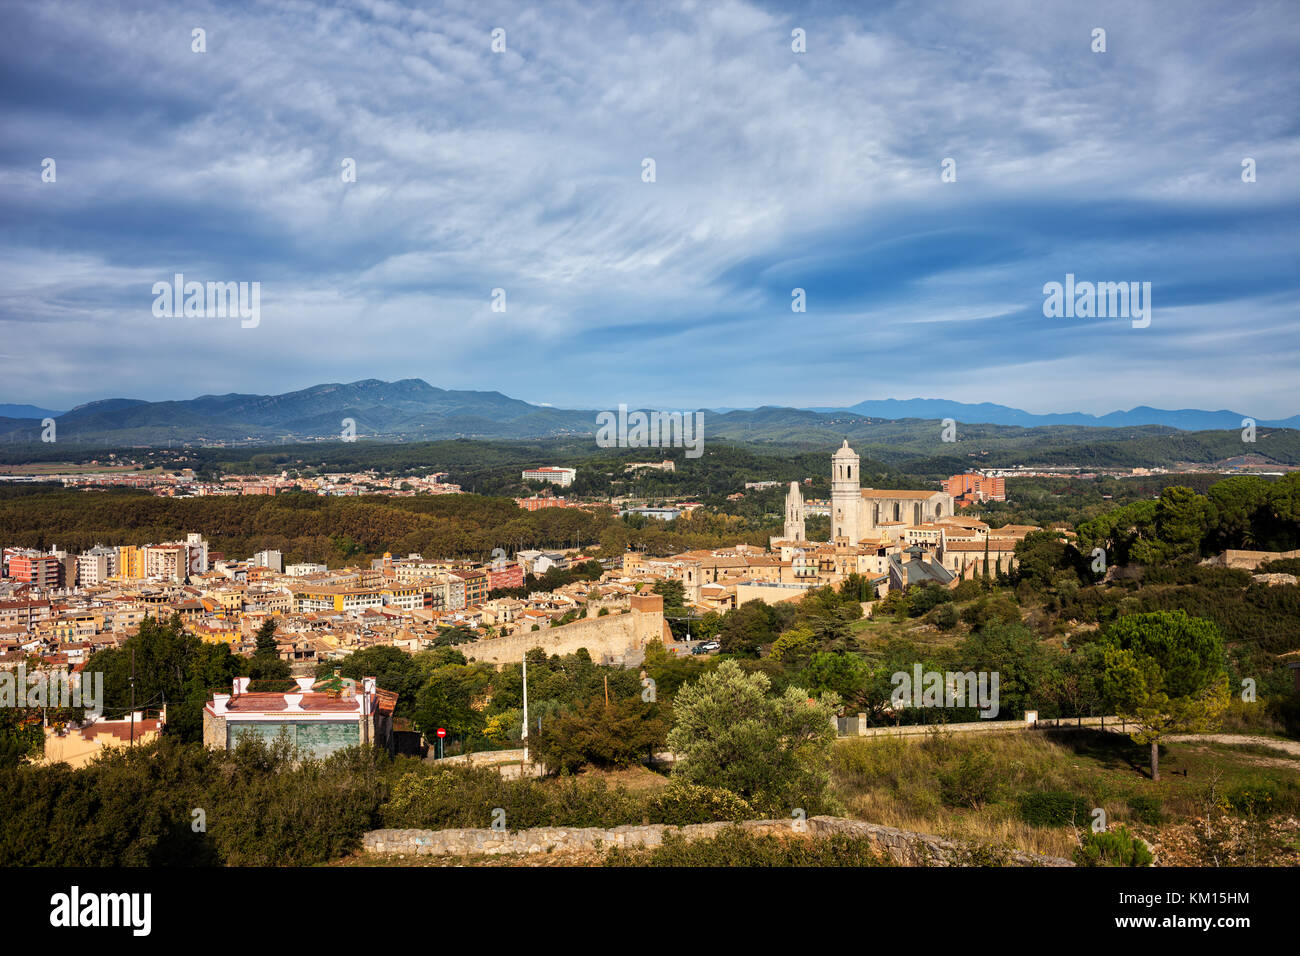 Girona city and province picturesque landscape in Catalonia region, Spain Stock Photo